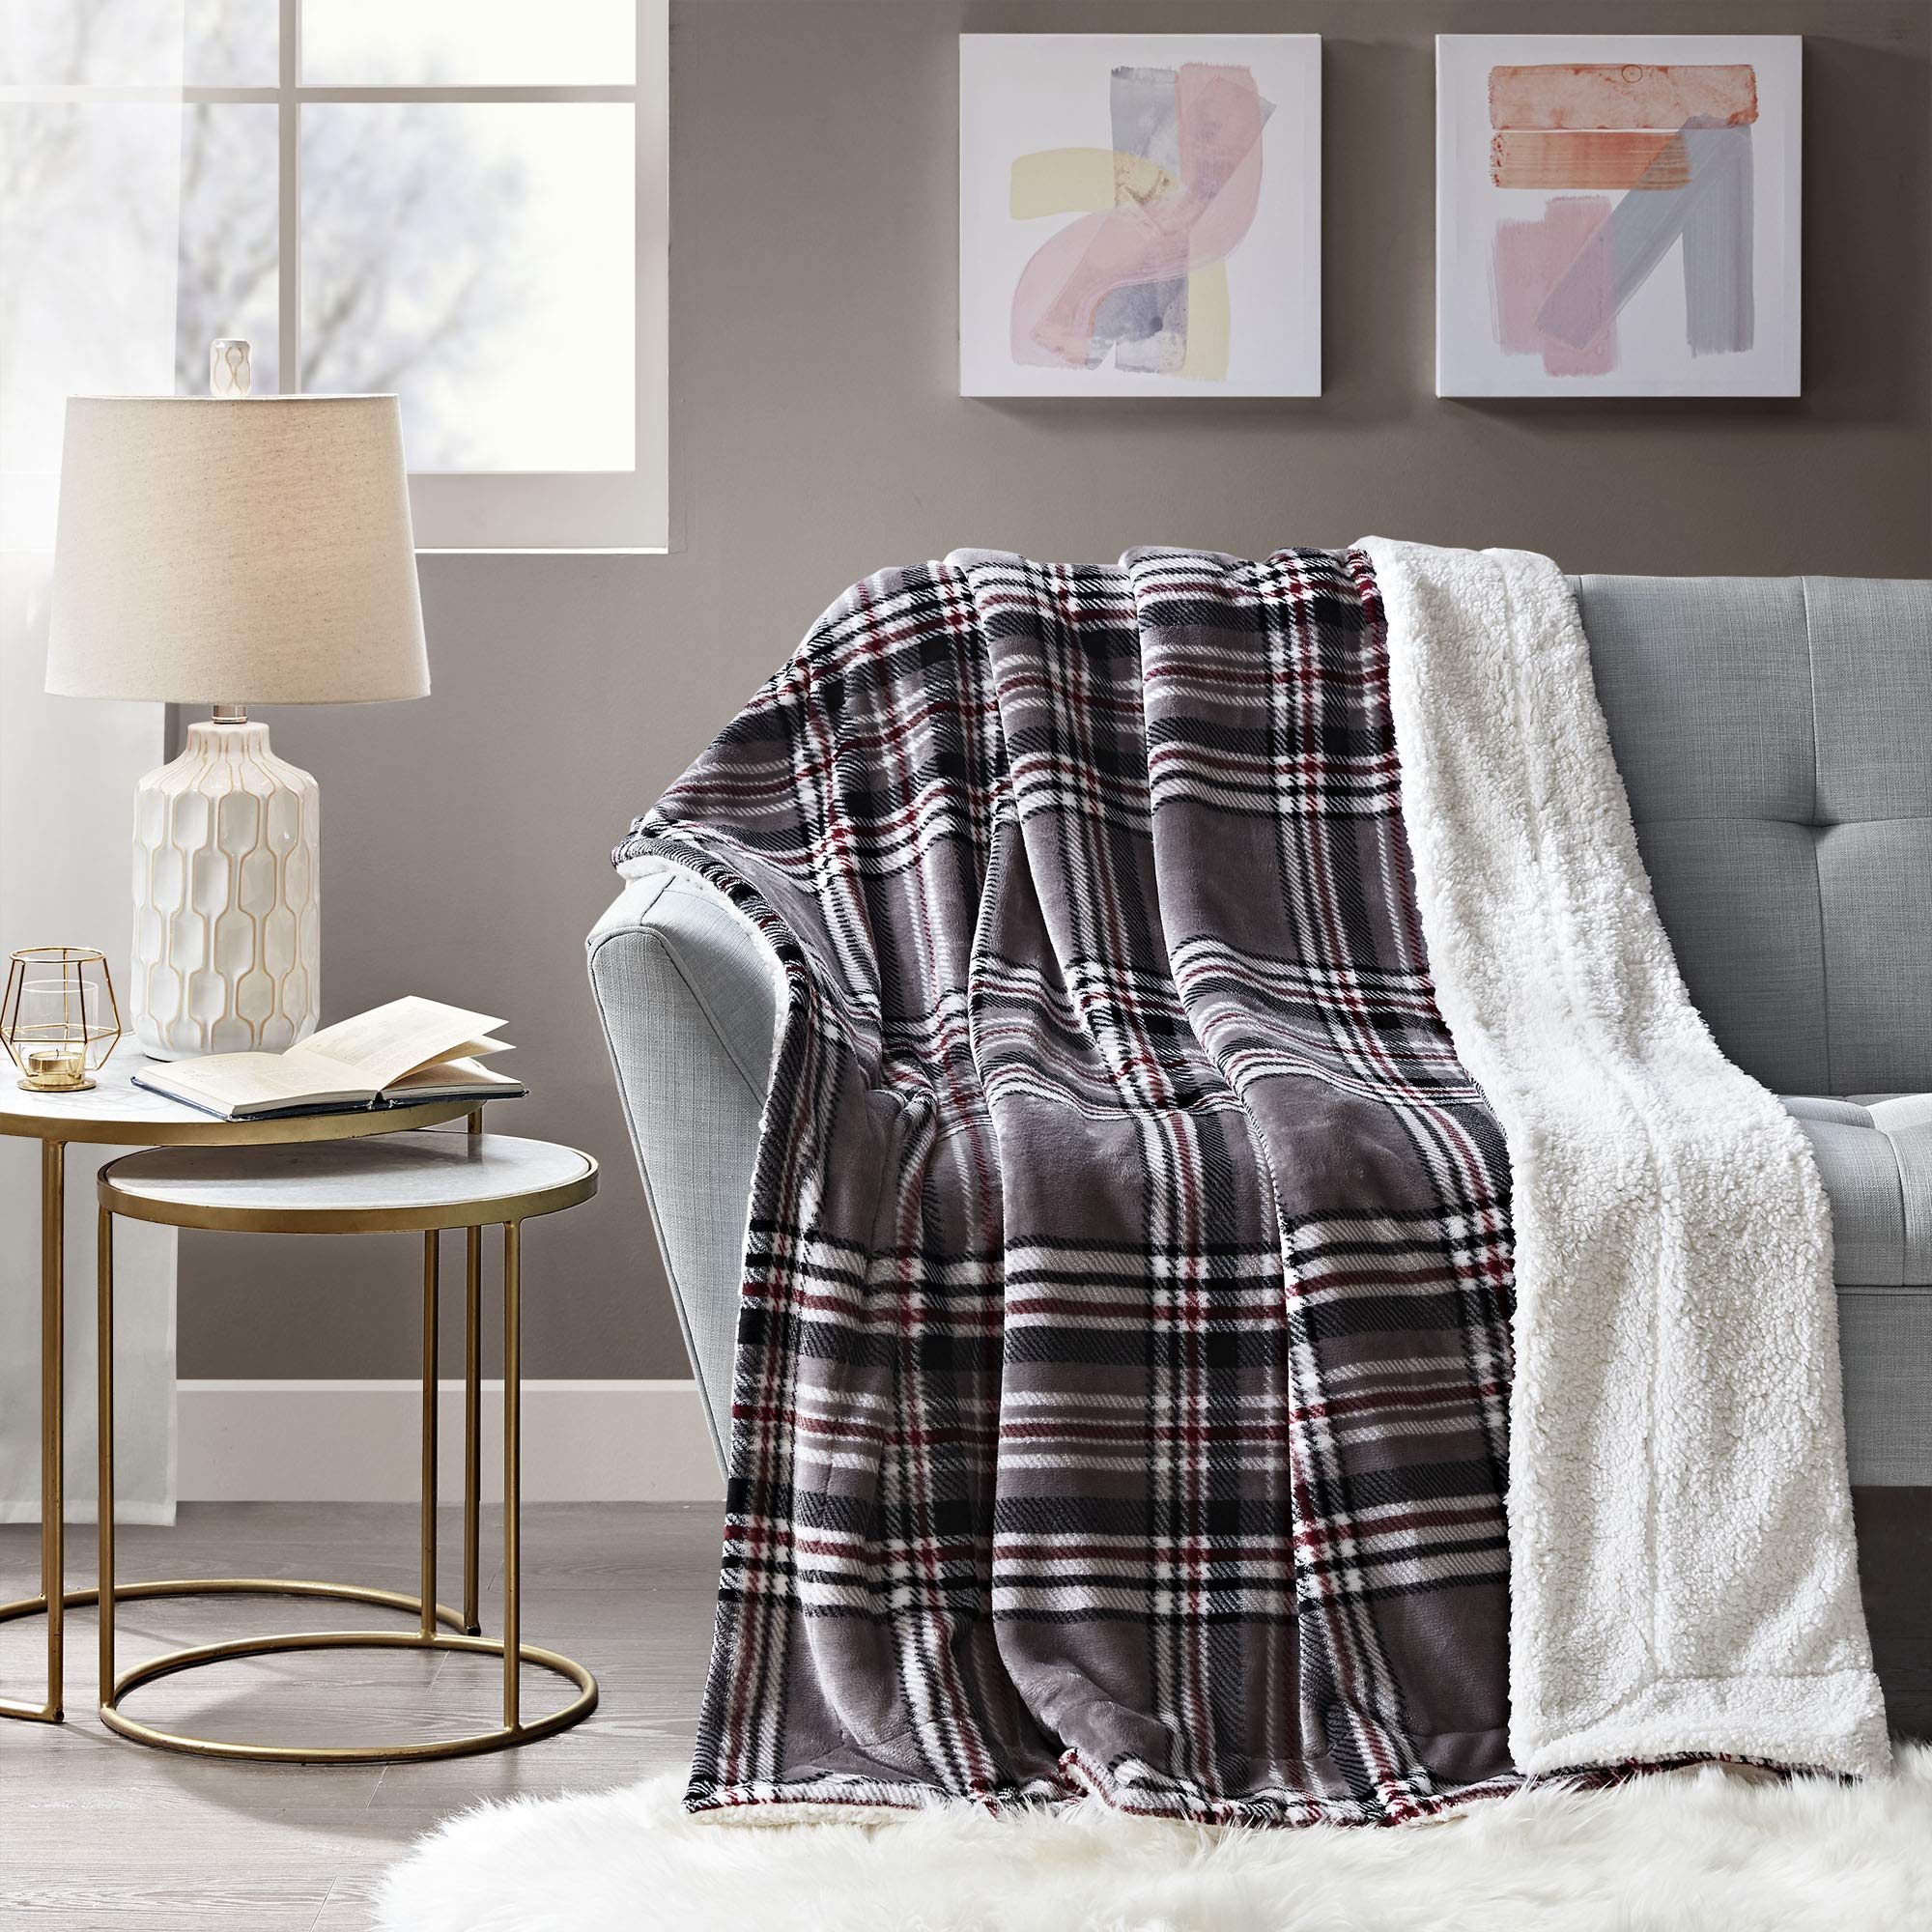 50" x 60" Comfort Spaces Sherpa Reversible Throw Blanket (Grey Plaid) $8 + Free Shipping w/ Prime or on orders over $35